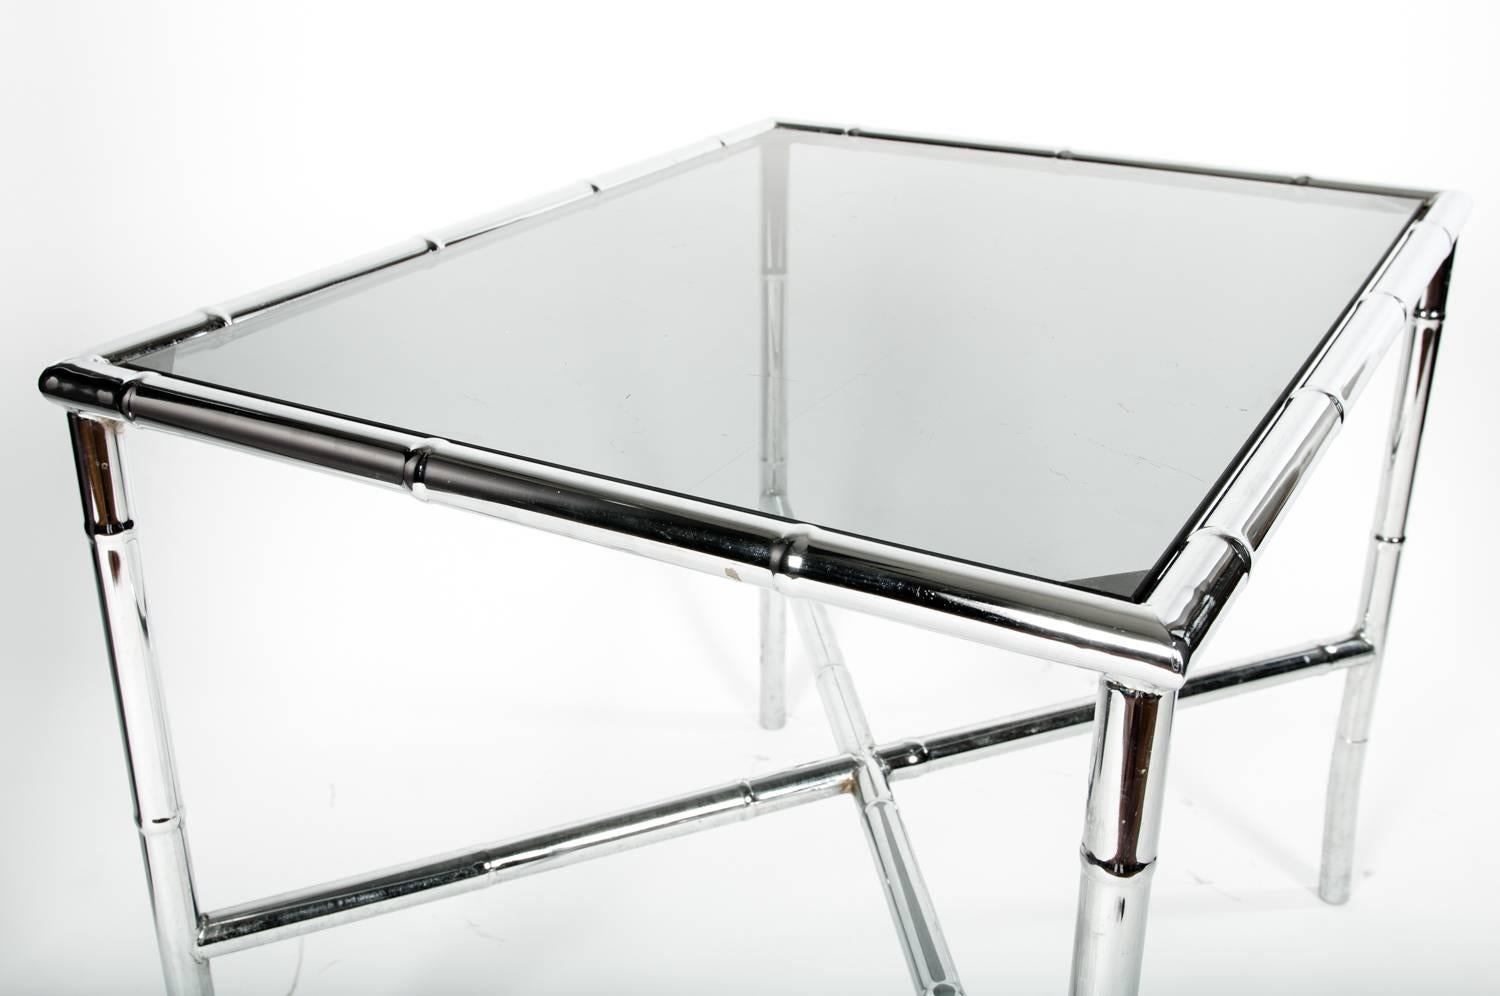 20th Century Mid-Century Modern Tinted Glass Top Coffee or Cocktail Table